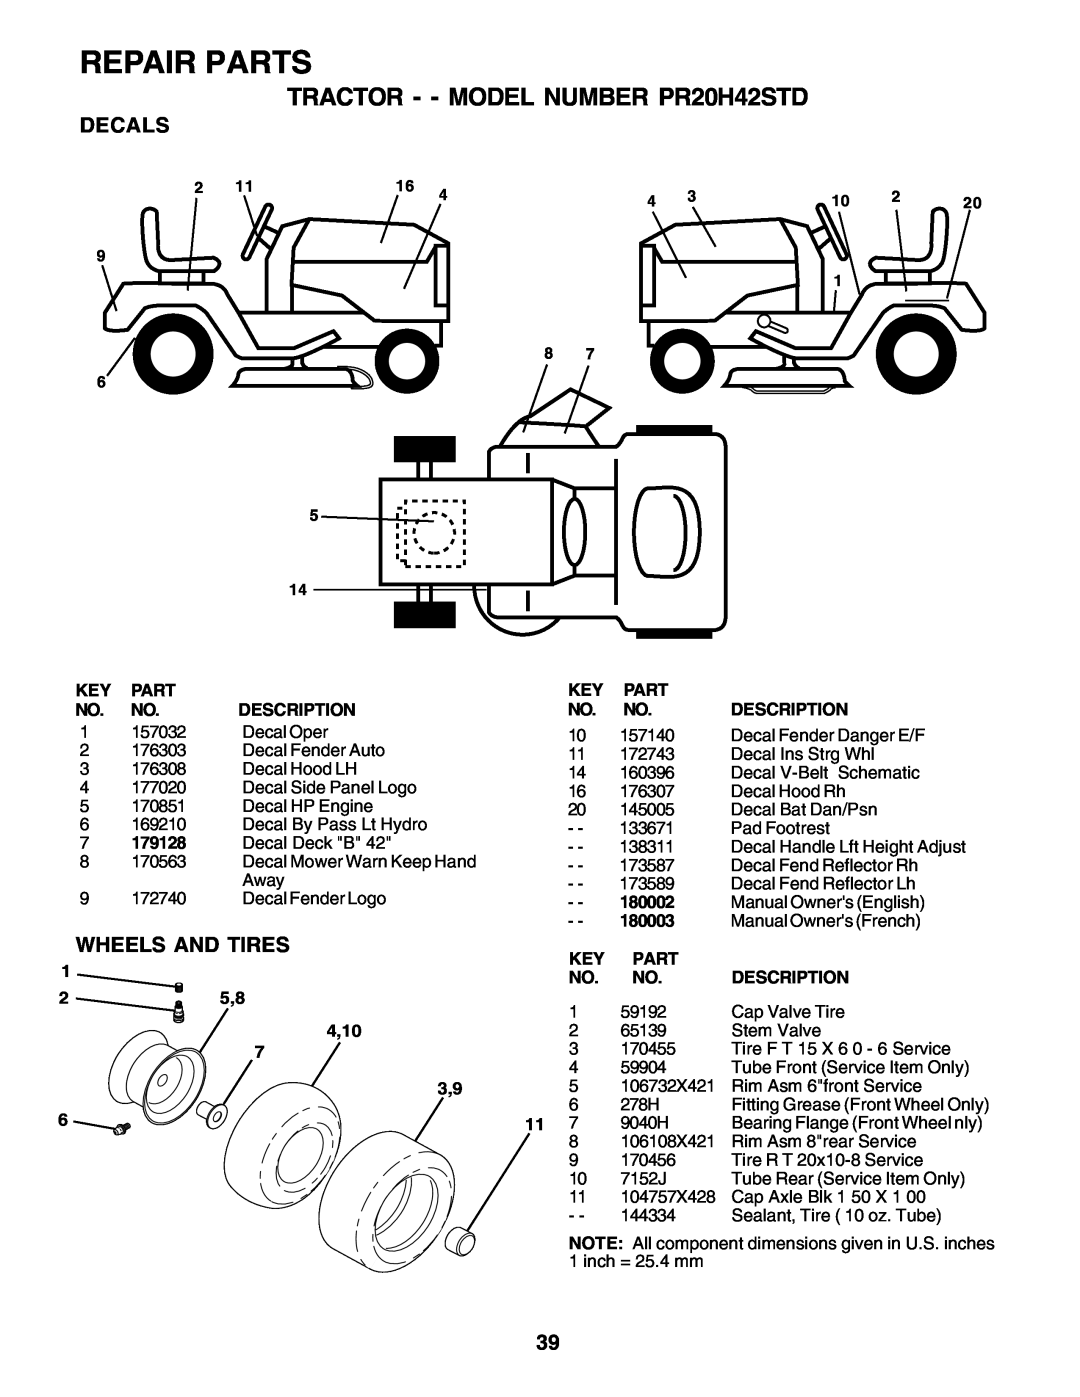 Poulan 180002 owner manual Repair Parts, TRACTOR - - MODEL NUMBER PR20H42STD, Decals, Wheels And Tires 